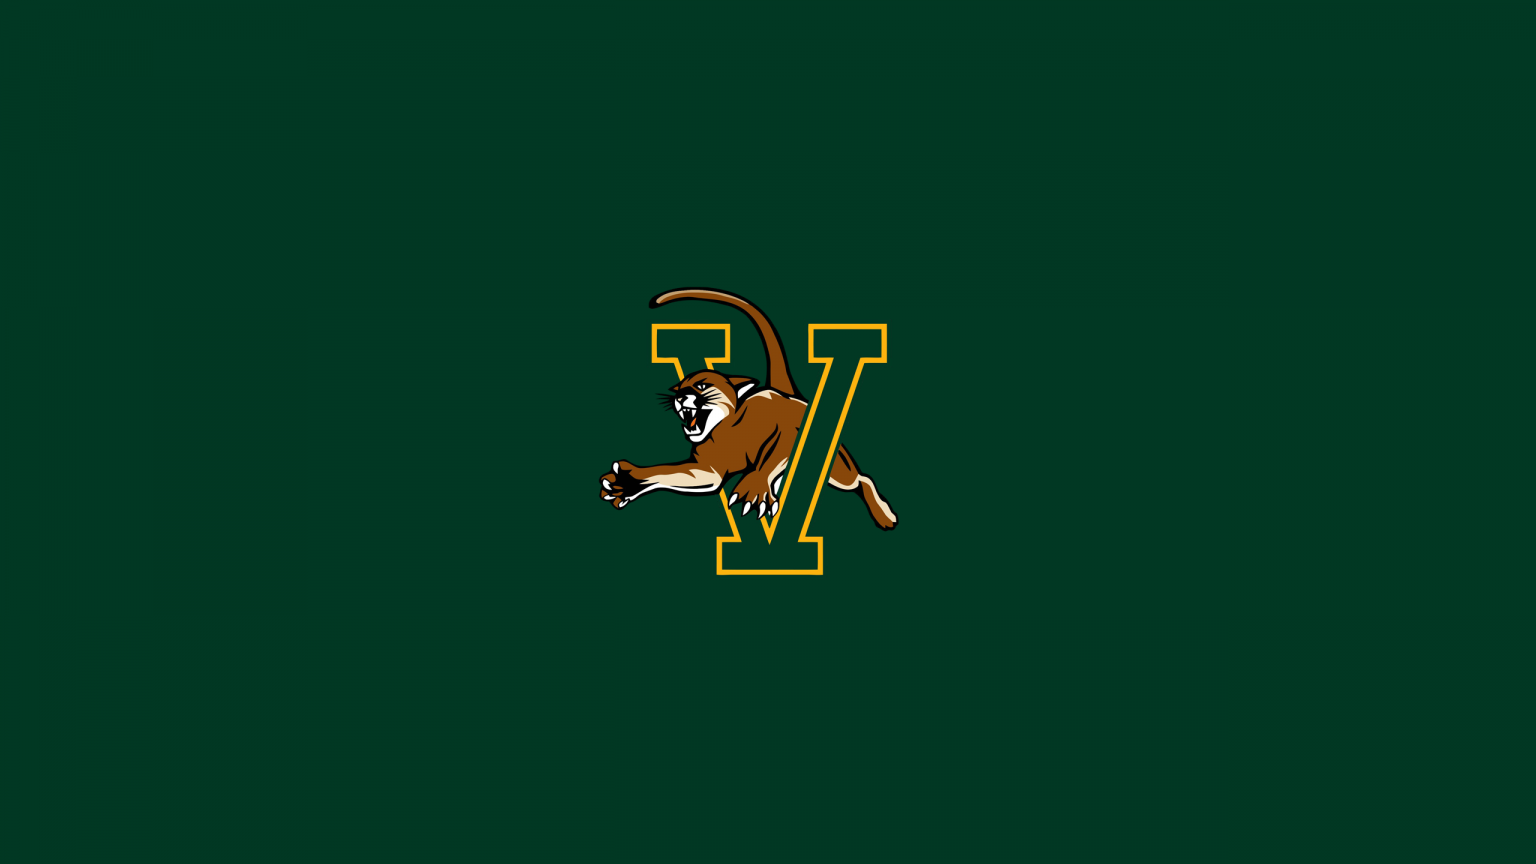 Vermont Catamounts Basketball - NCAAB - Square Bettor